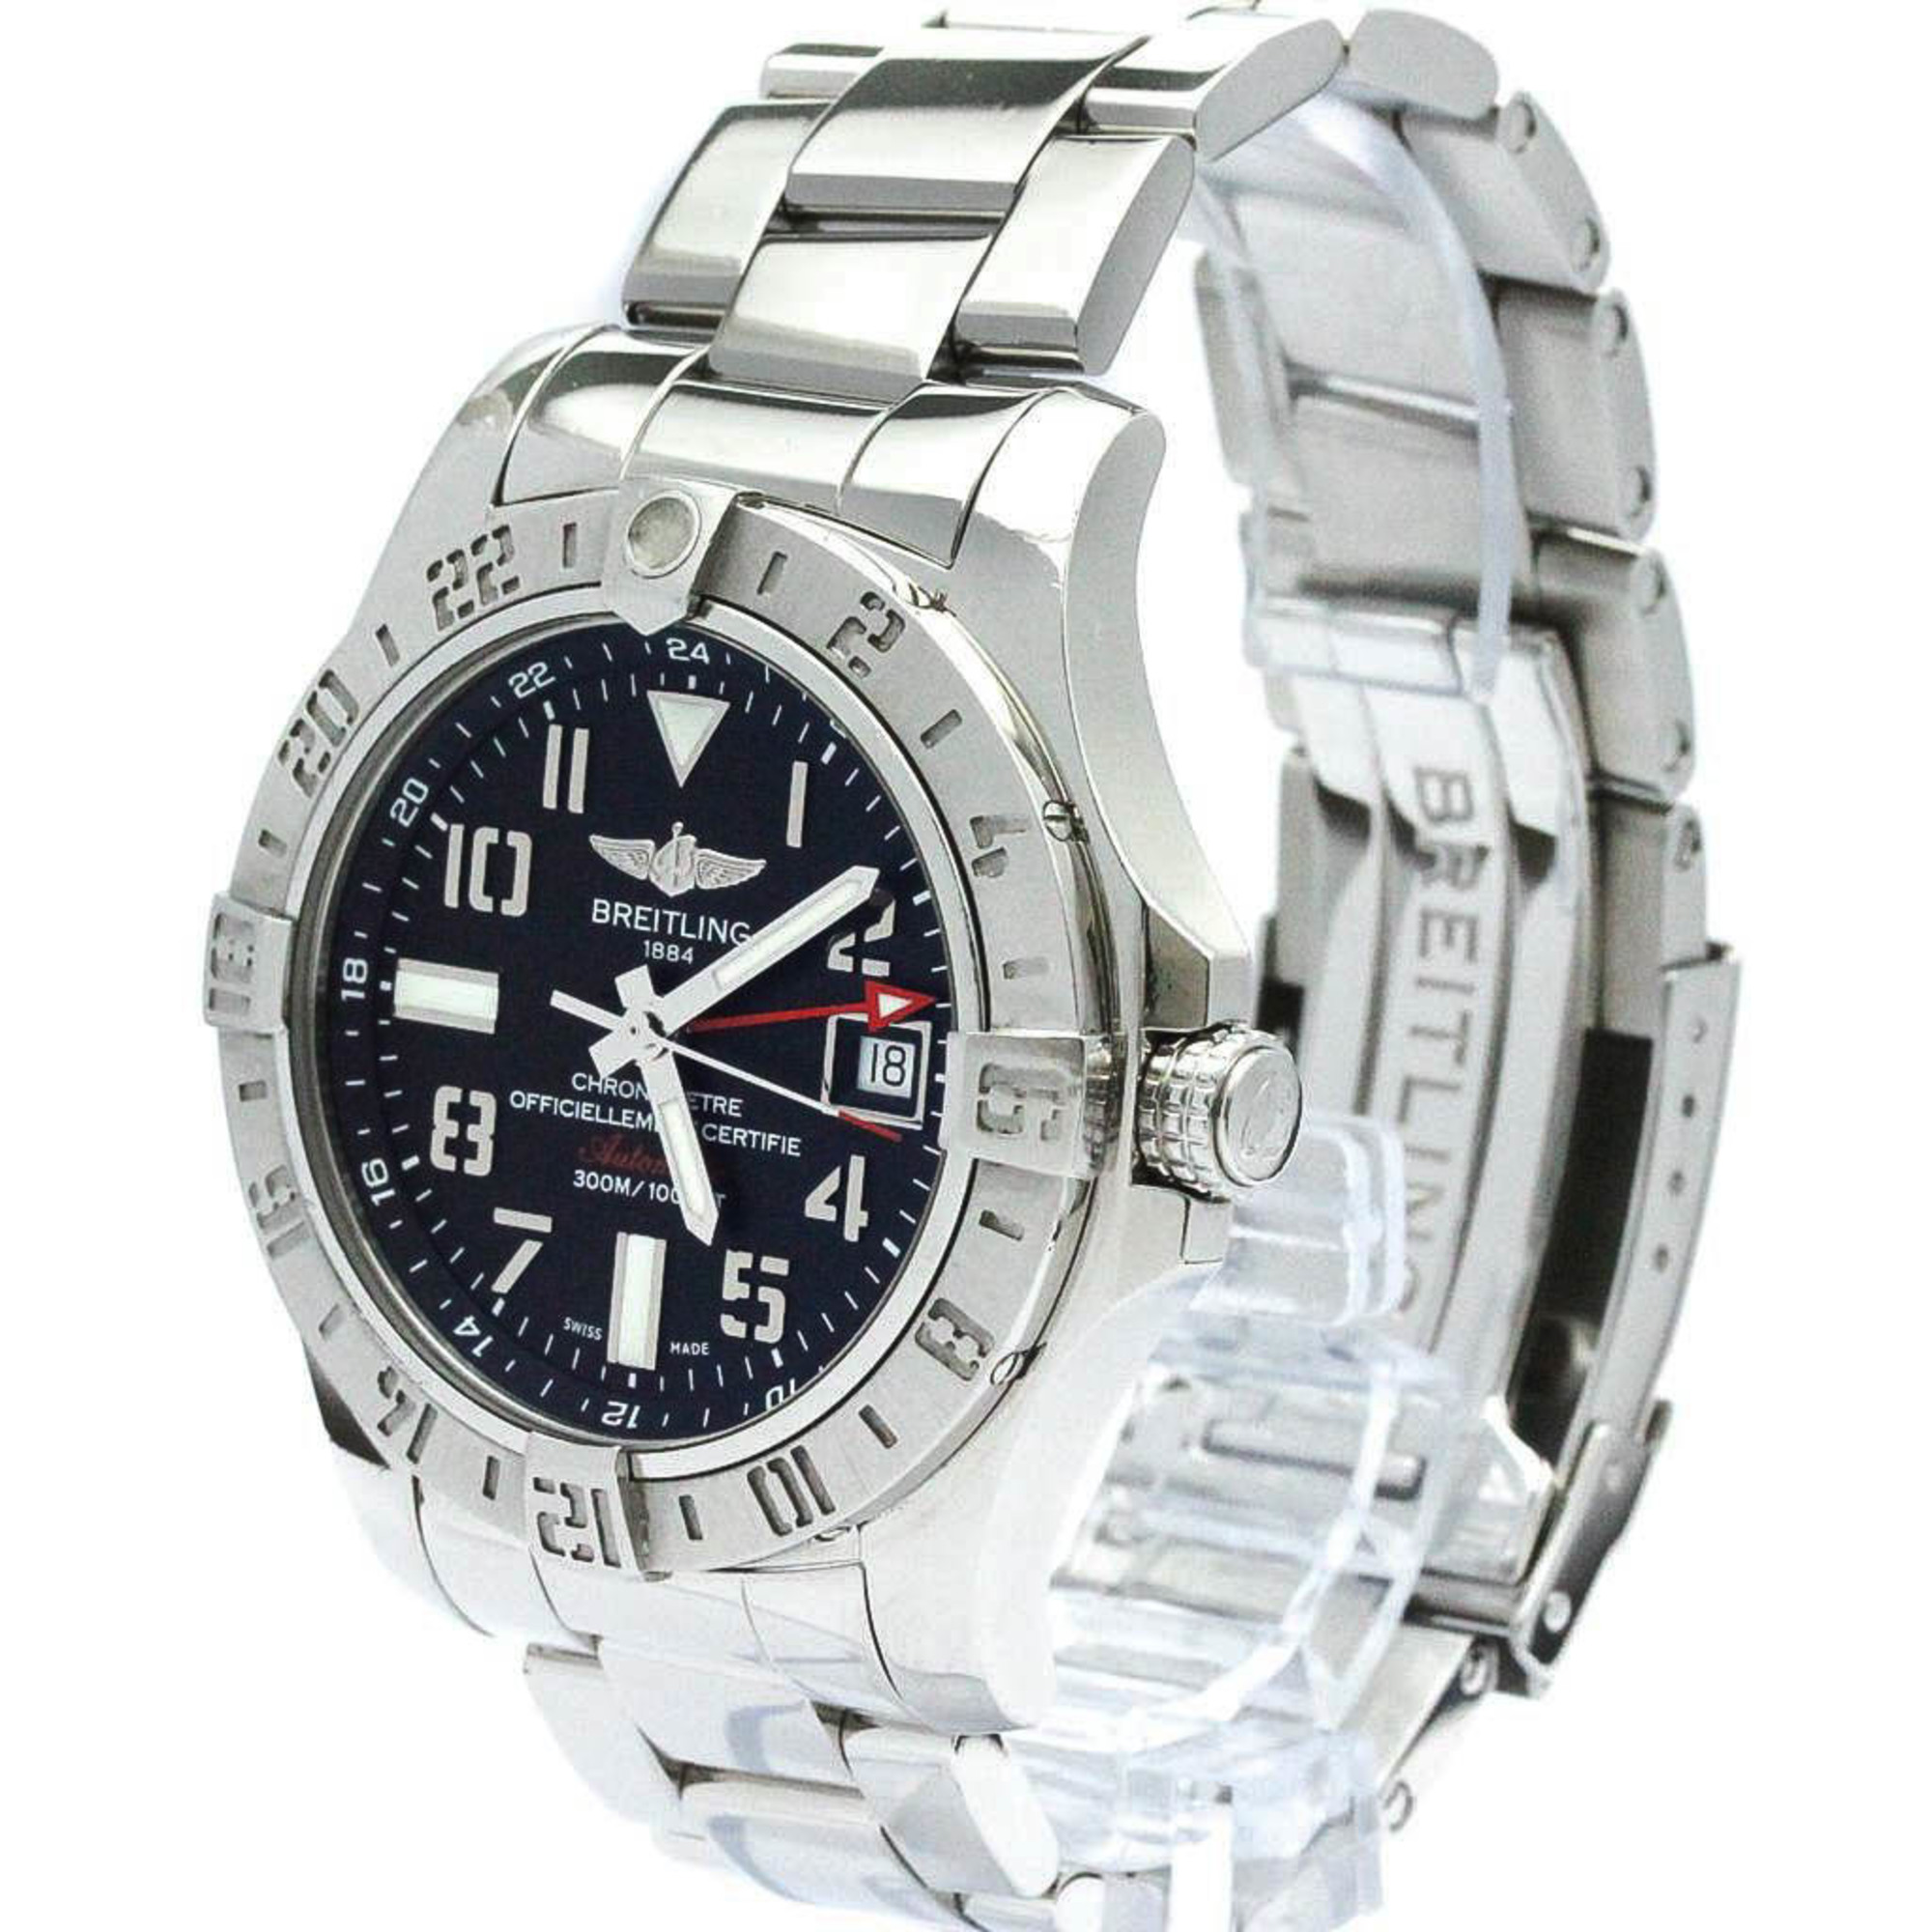 Polished BREITLING Avenger ll Chronograph Automatic Mens Watch A32390 BF571670